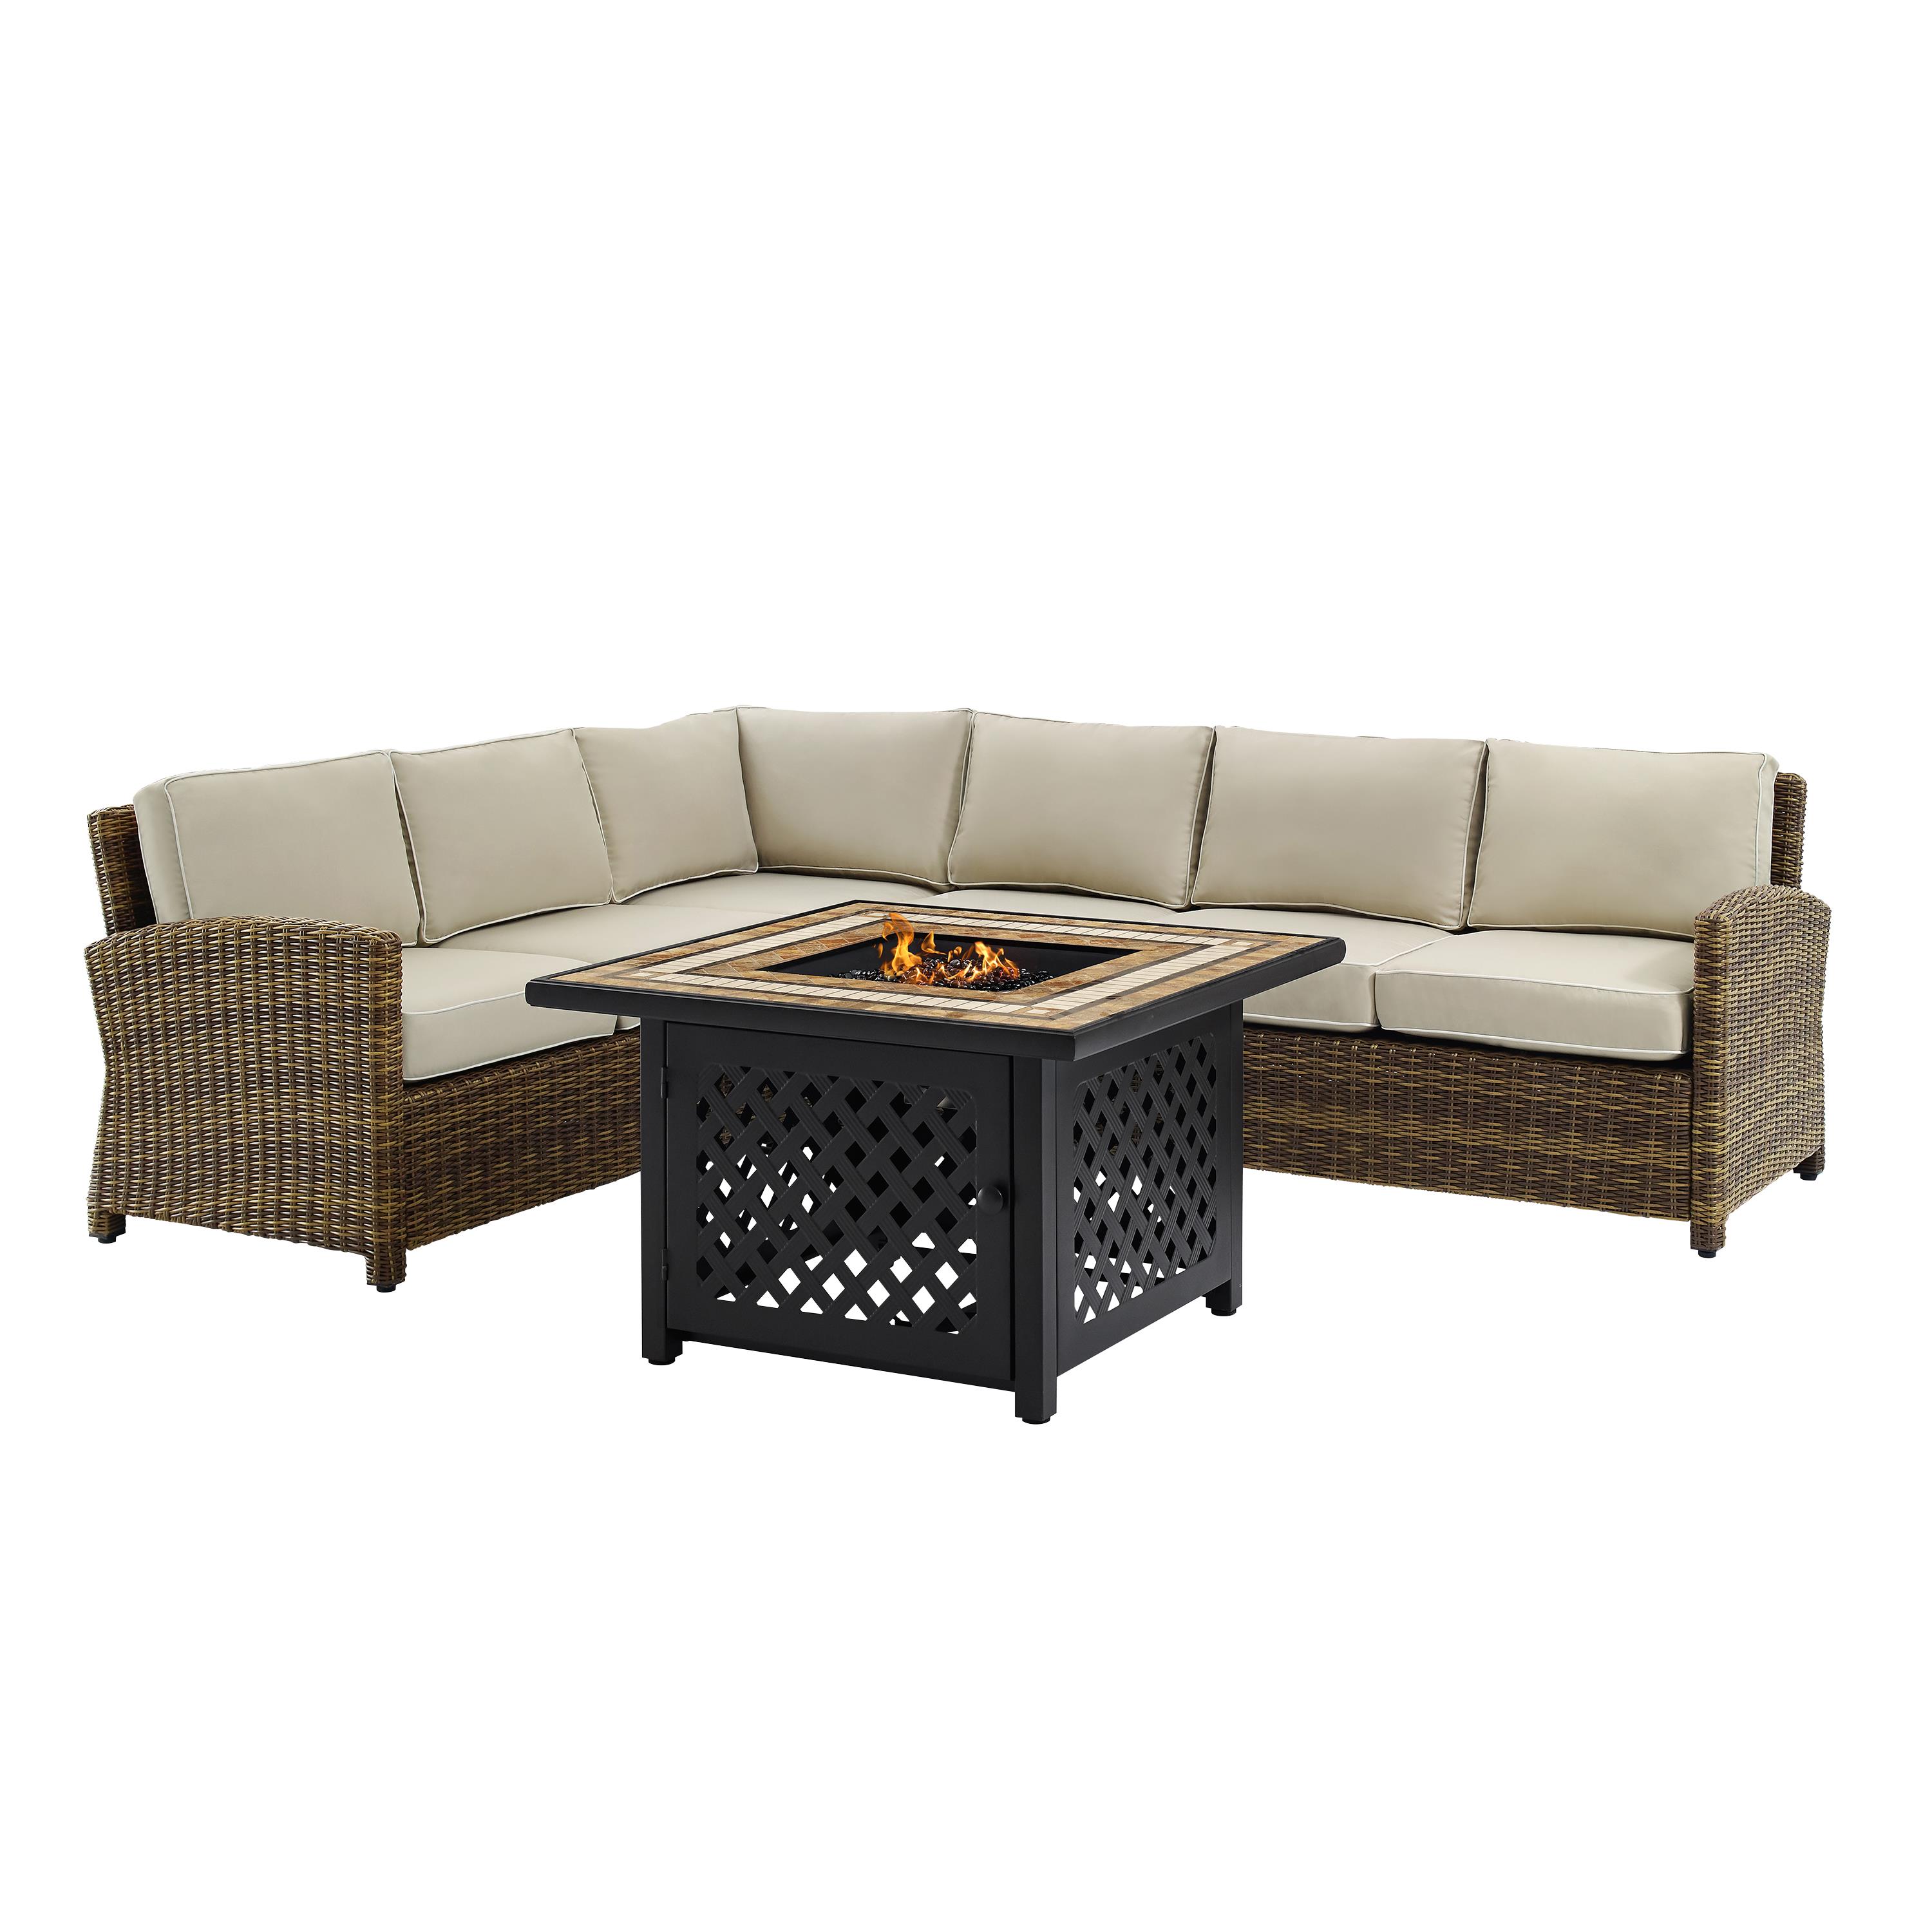 Bradenton 5Pc Outdoor Wicker Sectional Set W/Fire Table Weathered Brown/Sand - Right Corner Loveseat, Left Corner Loveseat, Corner Chair, Center Chair, & Tucson Fire Table - image 2 of 9